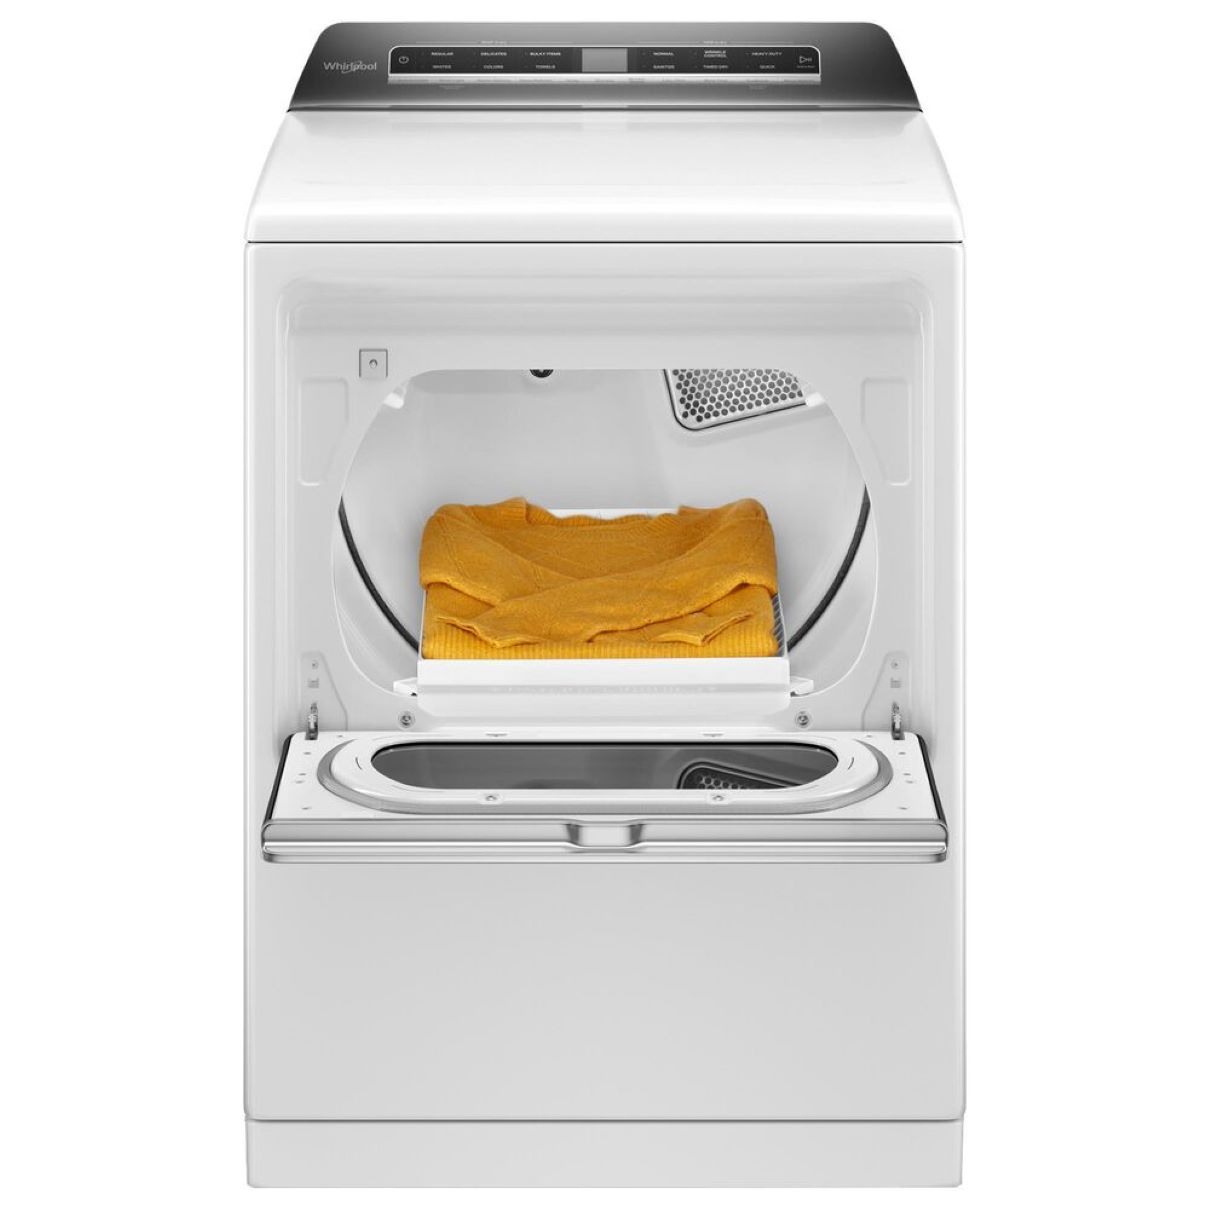 How To Fix The Error Code F77 For Whirlpool Dryer